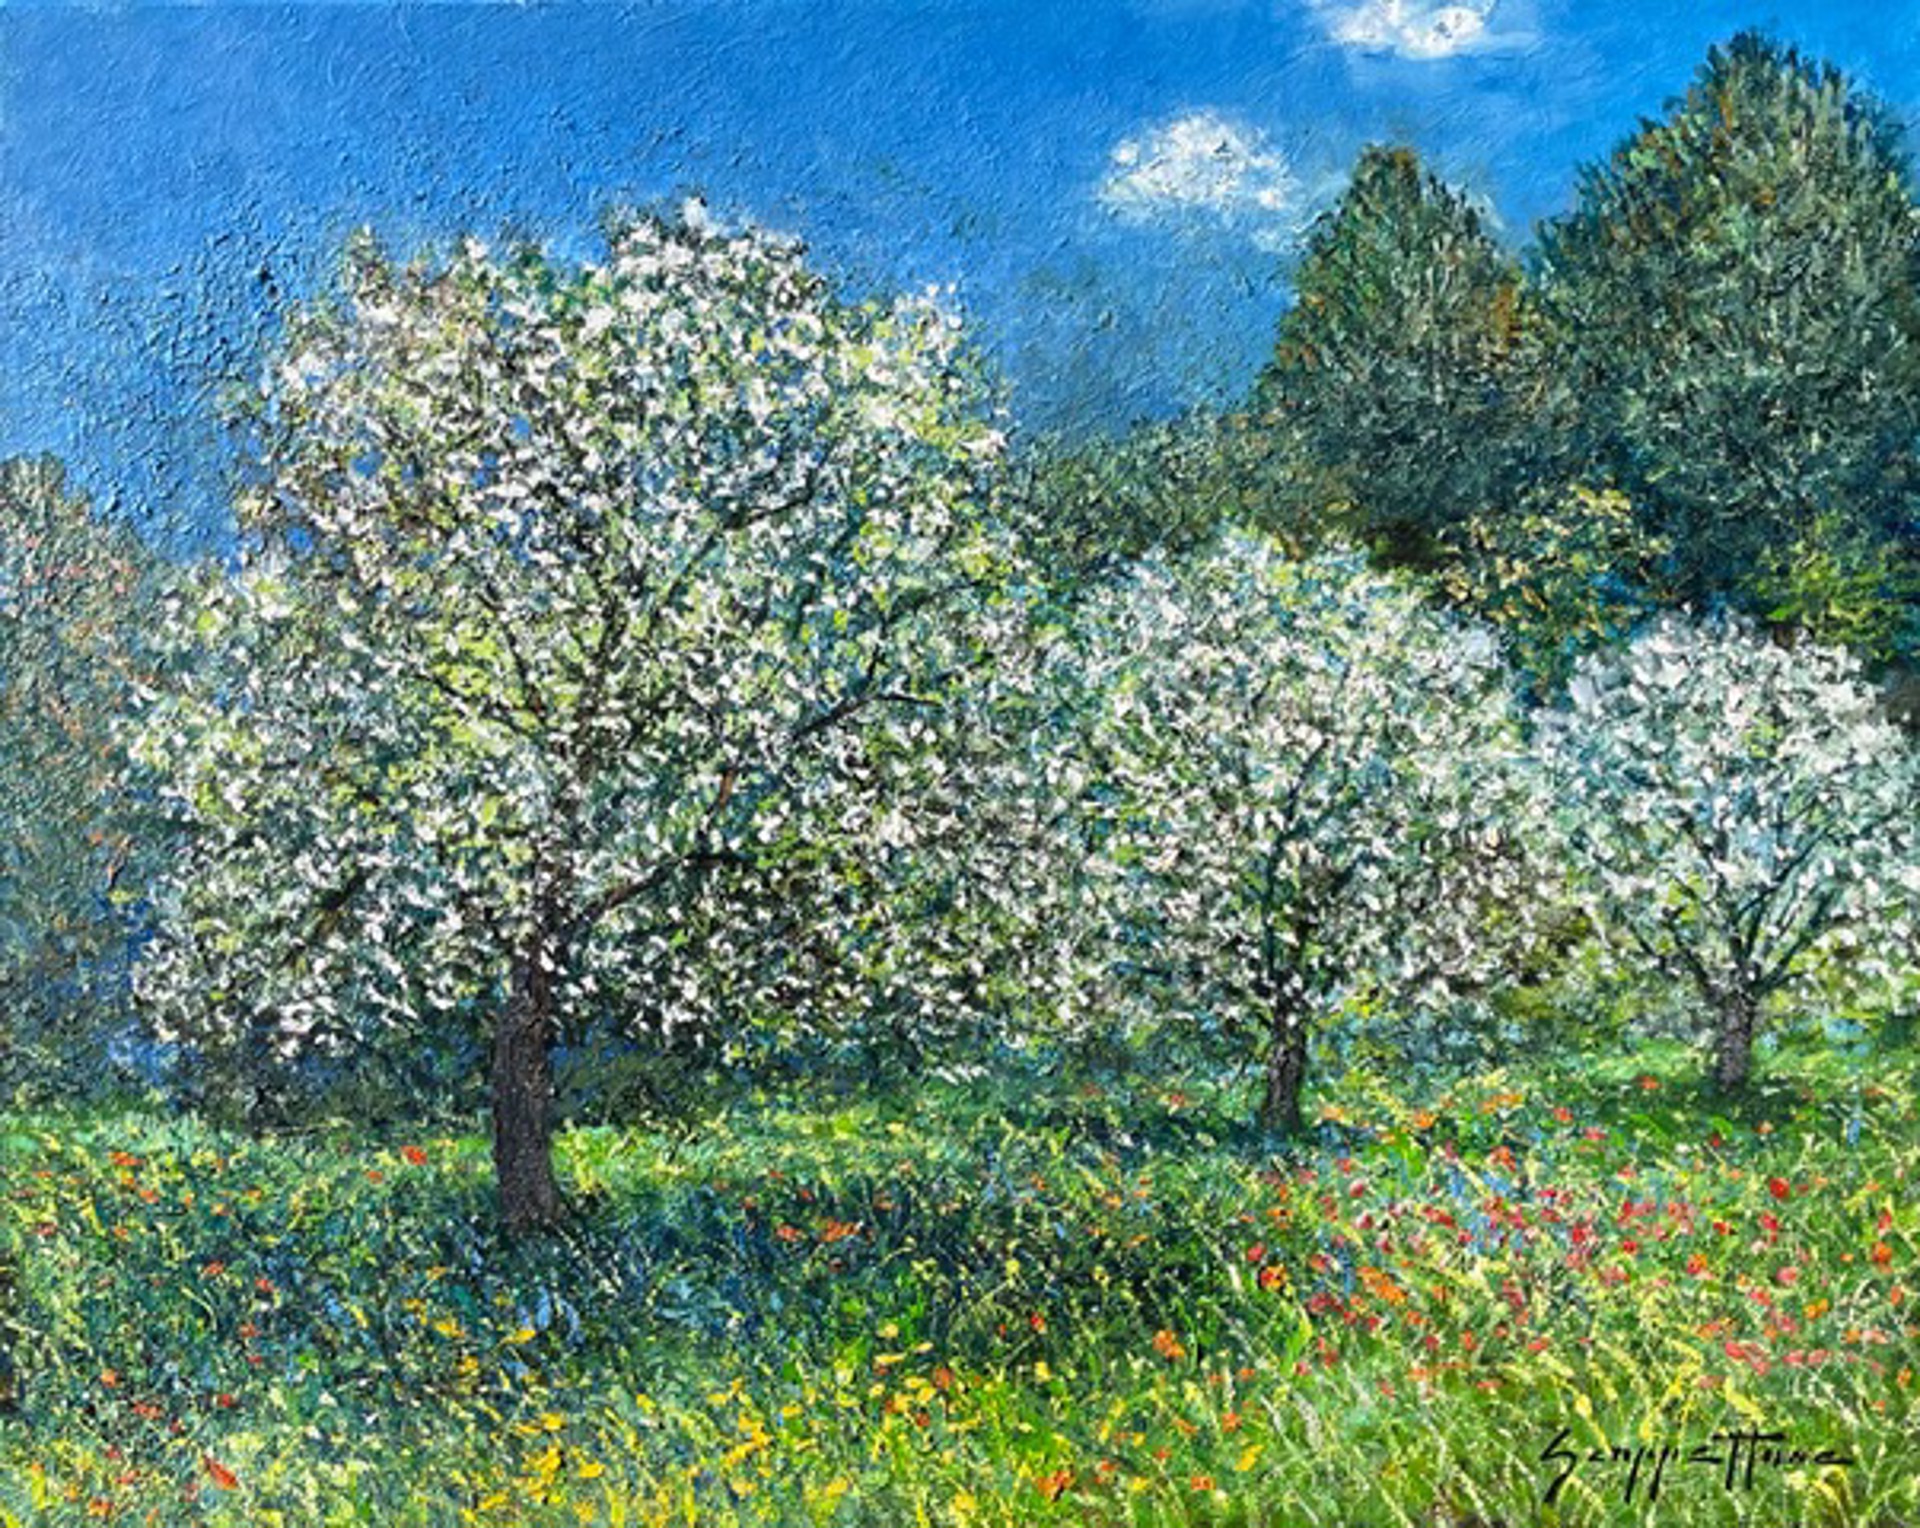 New Spring Orchard by James Scoppettone